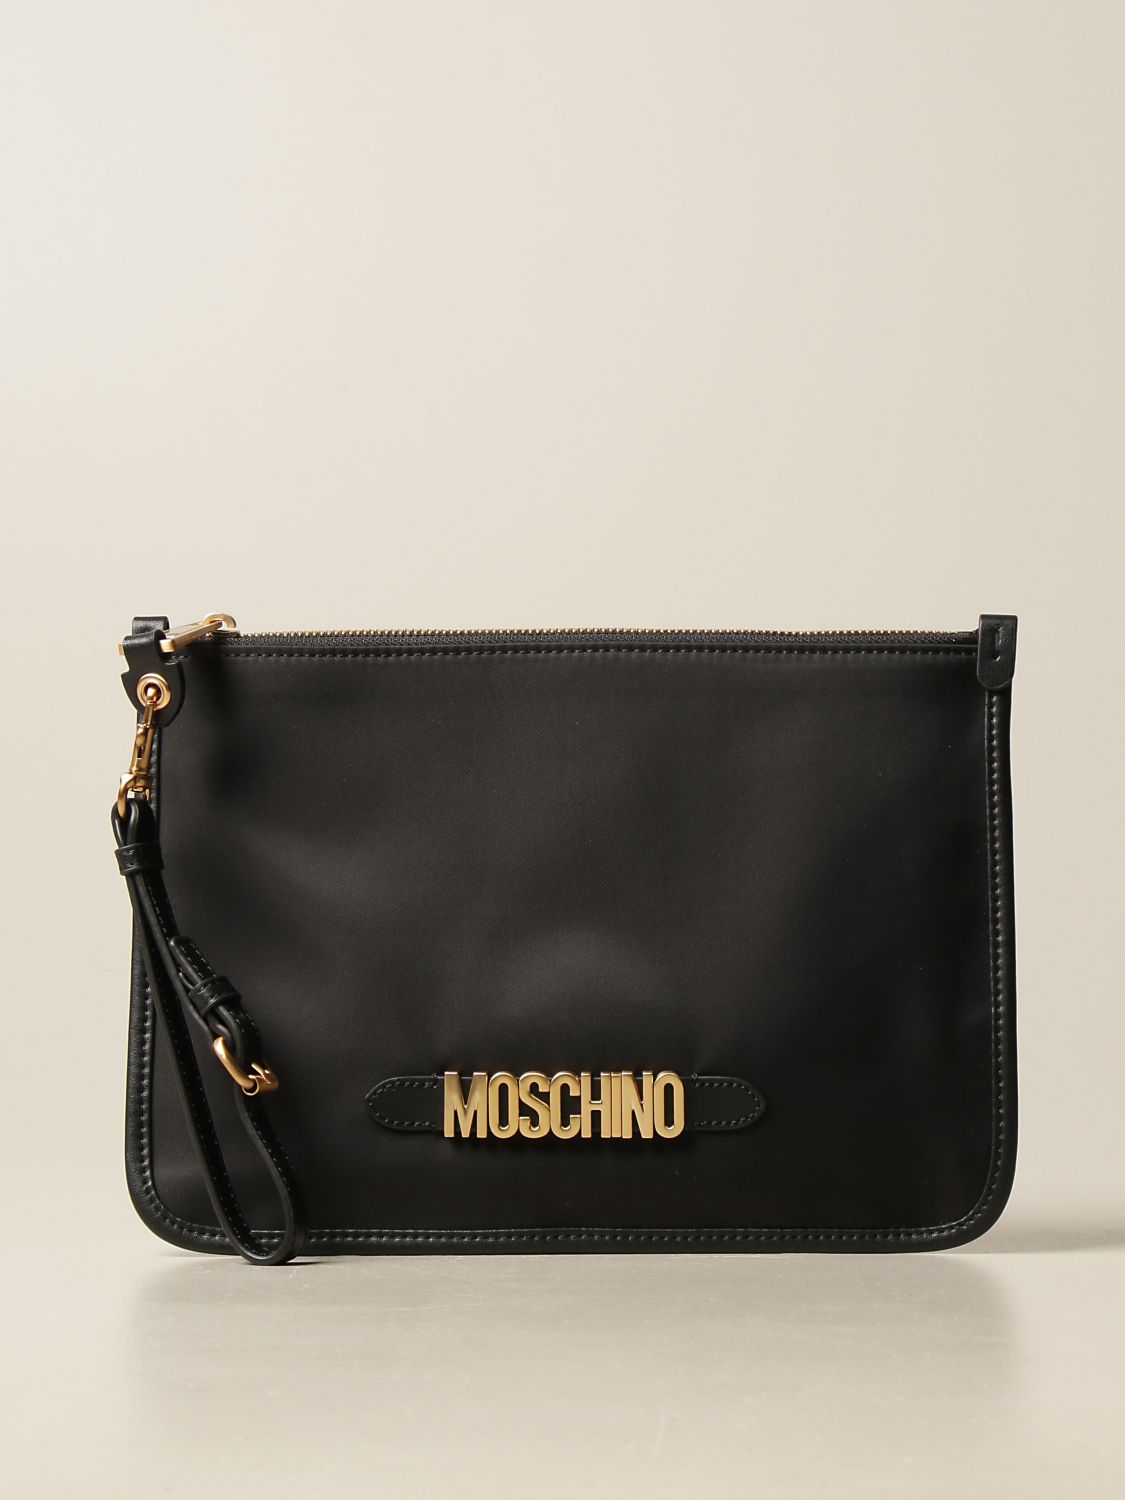 MOSCHINO COUTURE: Nylon bag with lettering | Clutch Moschino Couture ...